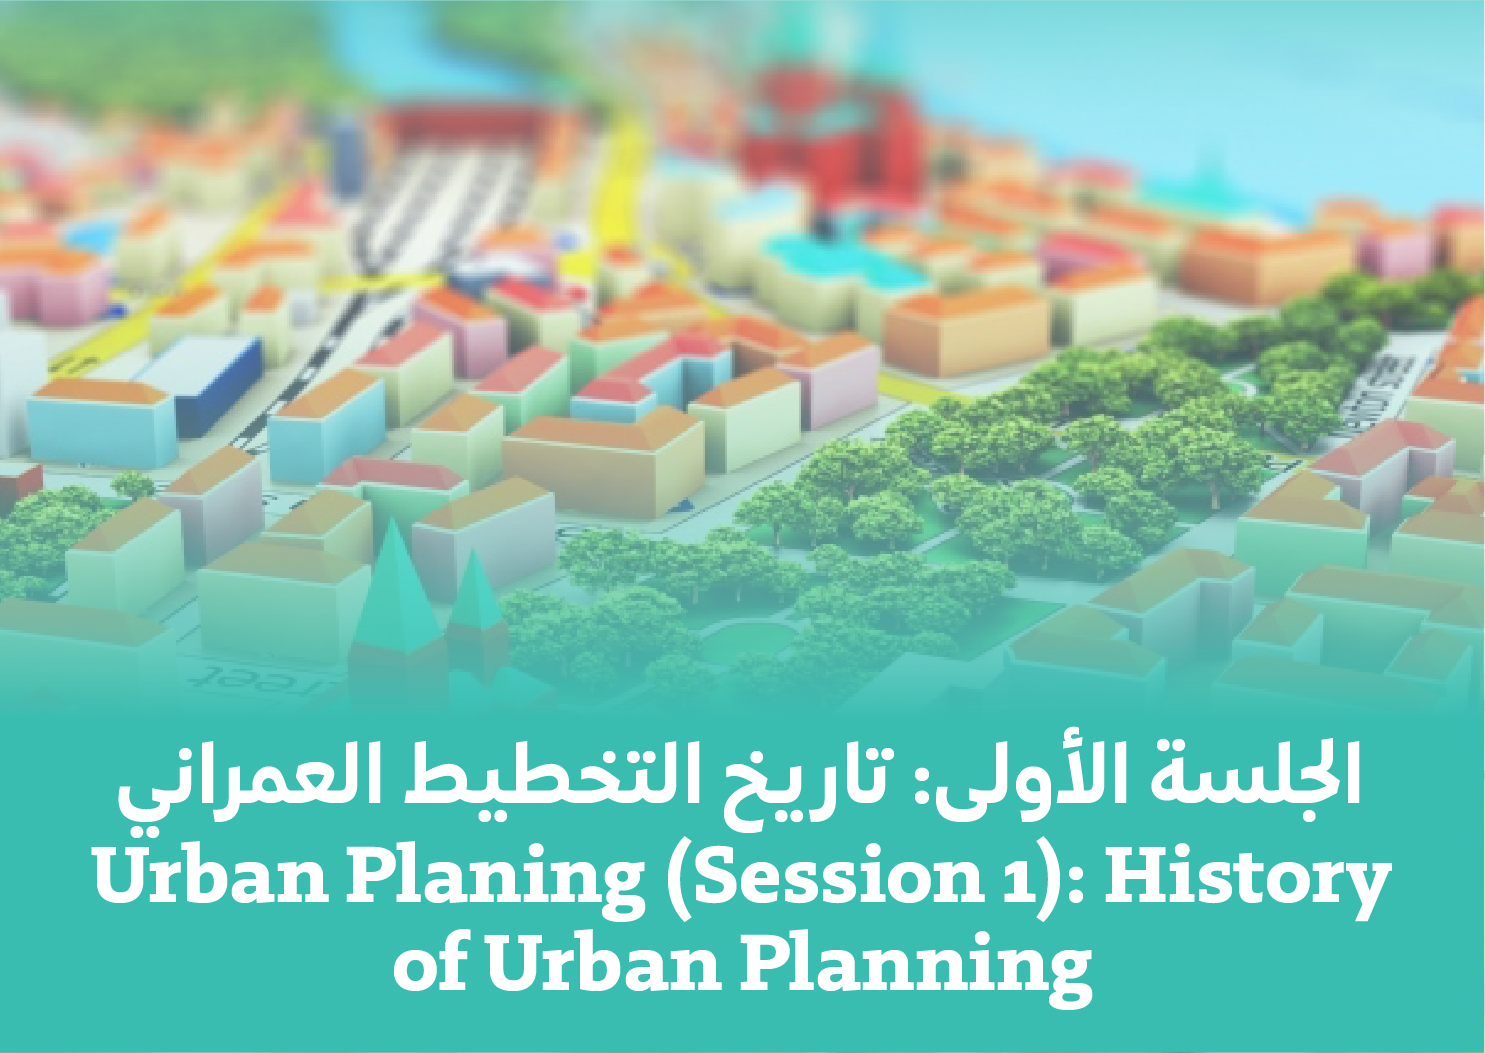 Session 1: History of Urban Planning